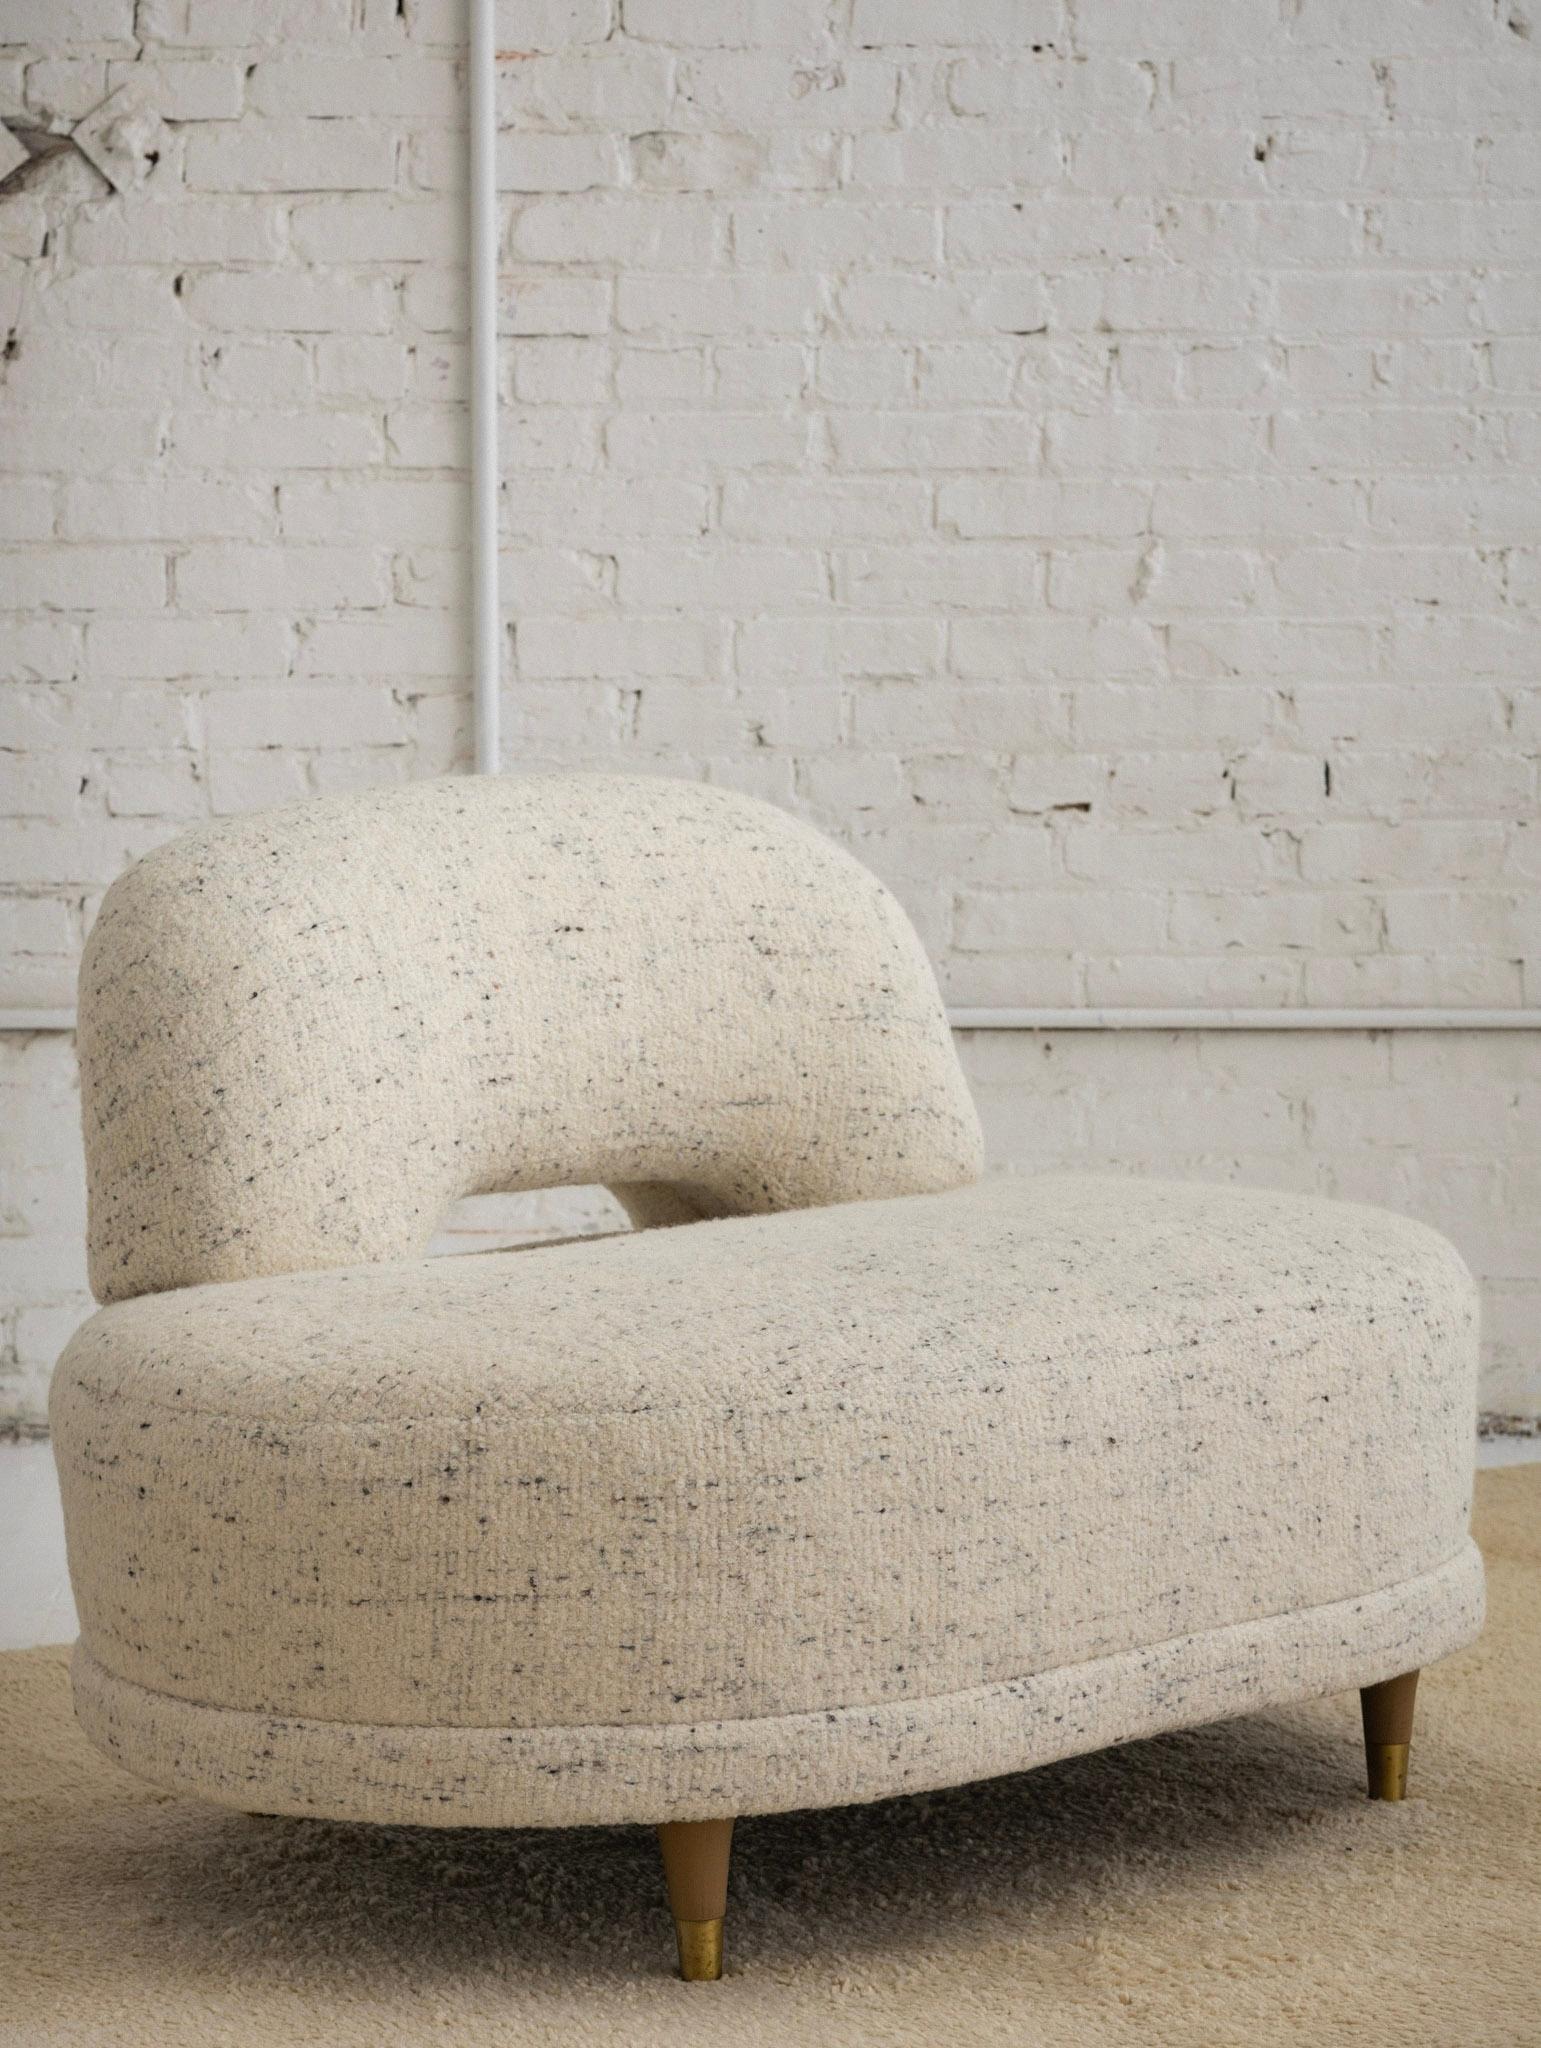 A Mid-Century Modern slipper lounge chair. Newly reupholstered in a soft textured wool. Cream in color with speckles of brown and black. Blonde wood feet with brass caps.